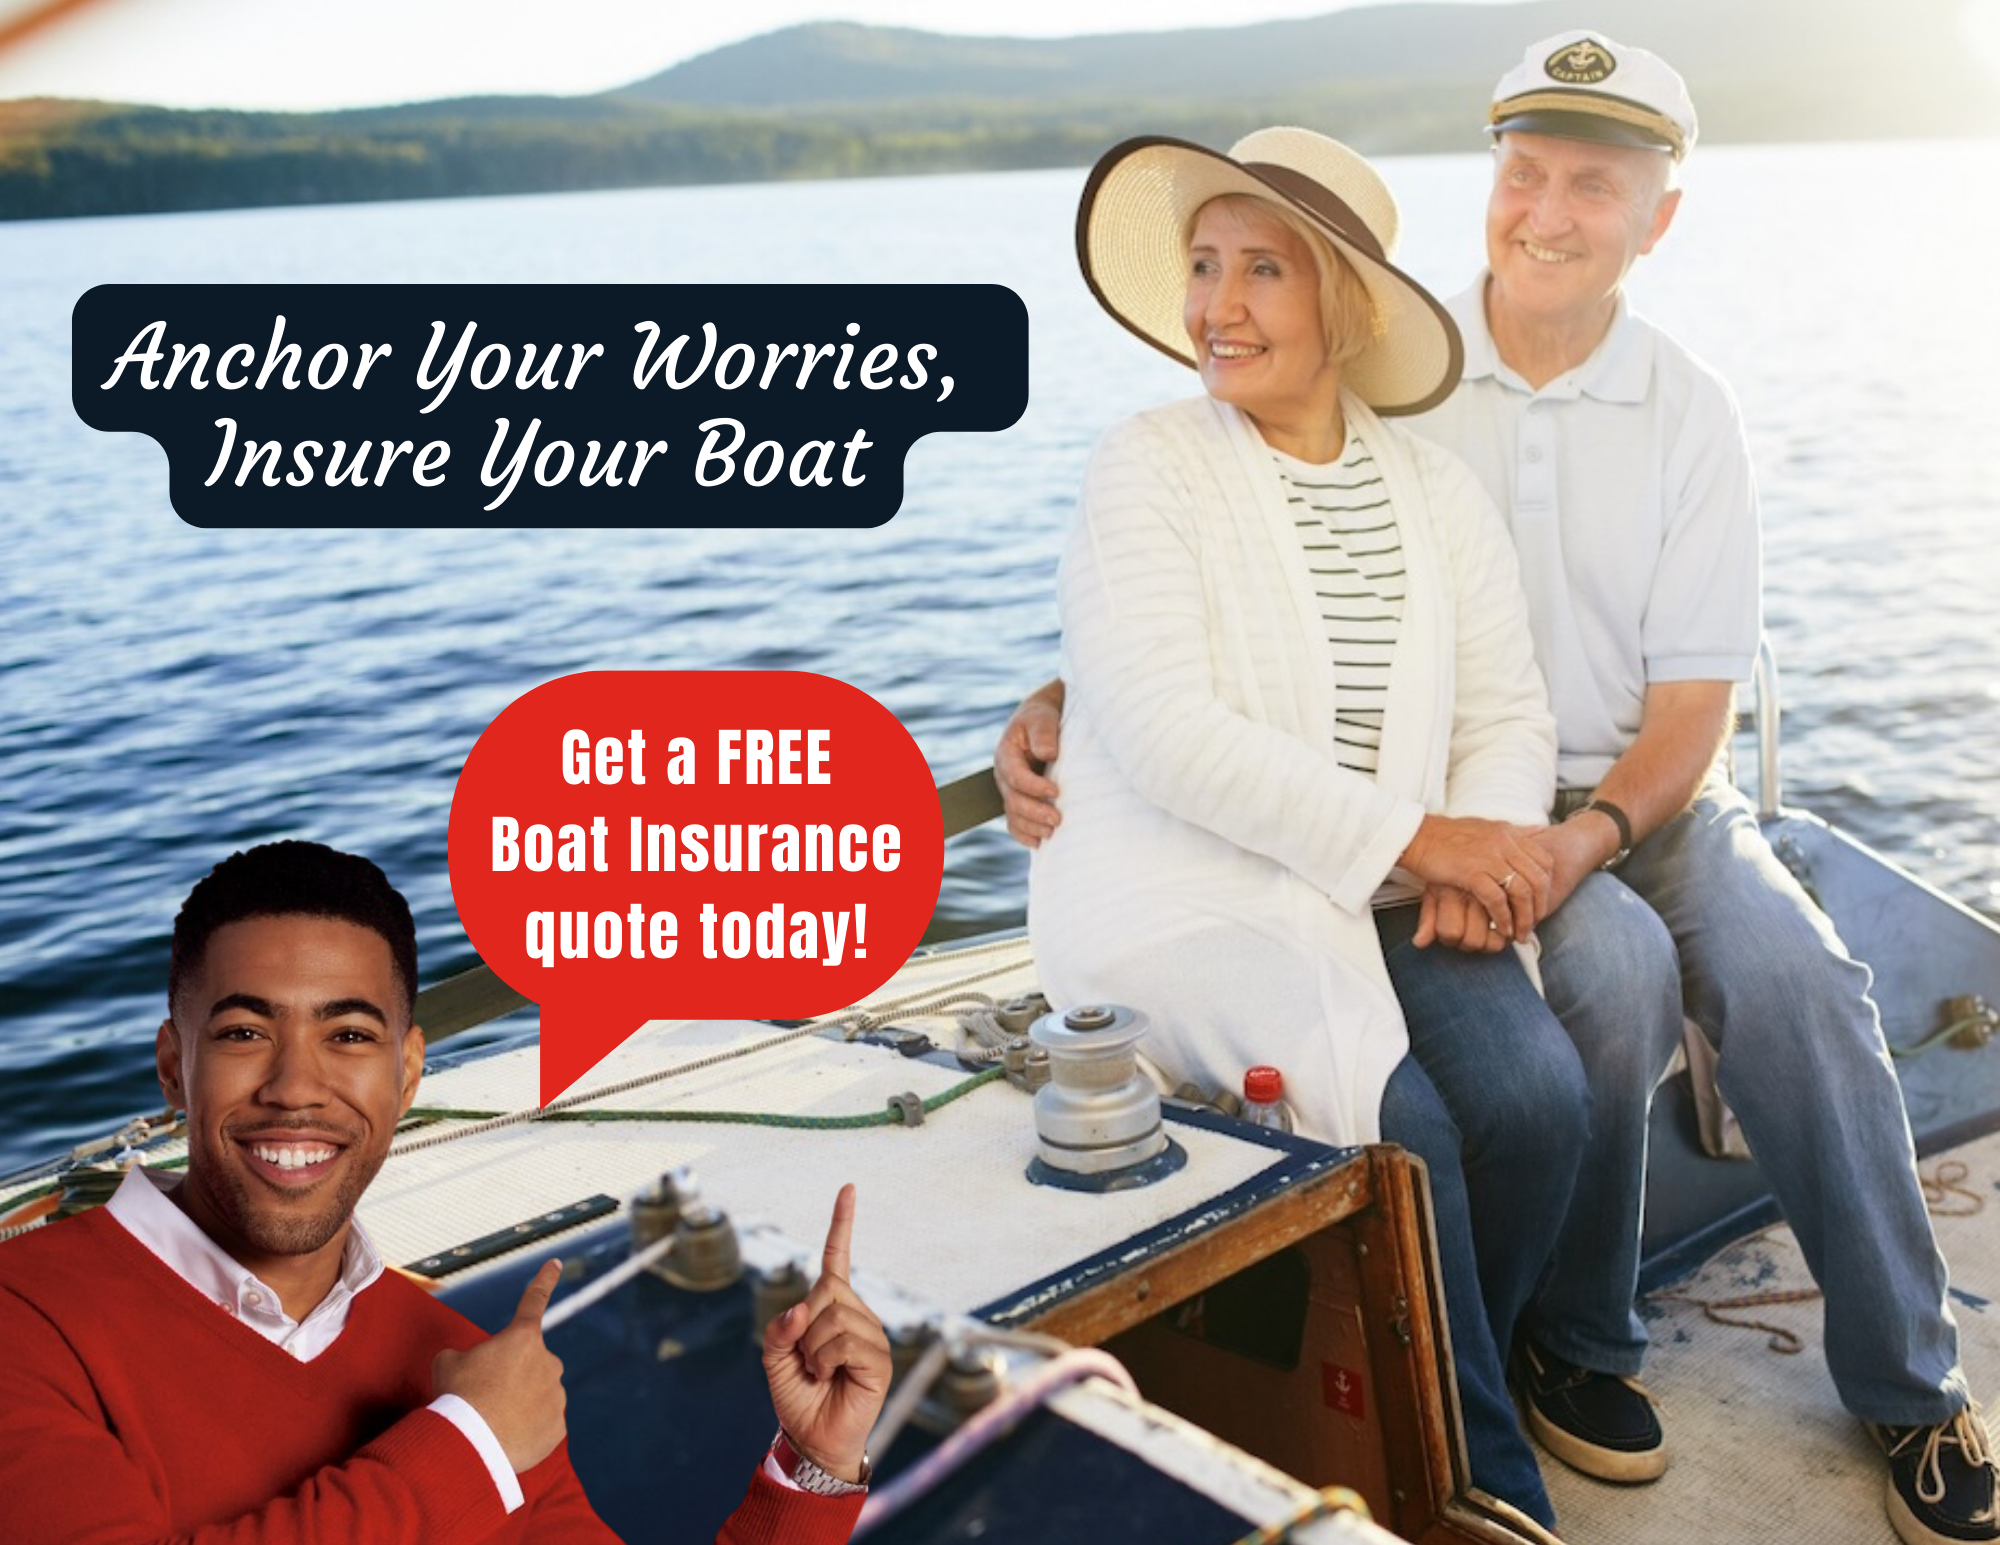 Call today for a free boat insurance quote! Vahn Bozoian - State Farm Insurance Agent Phoenix (480)648-2928